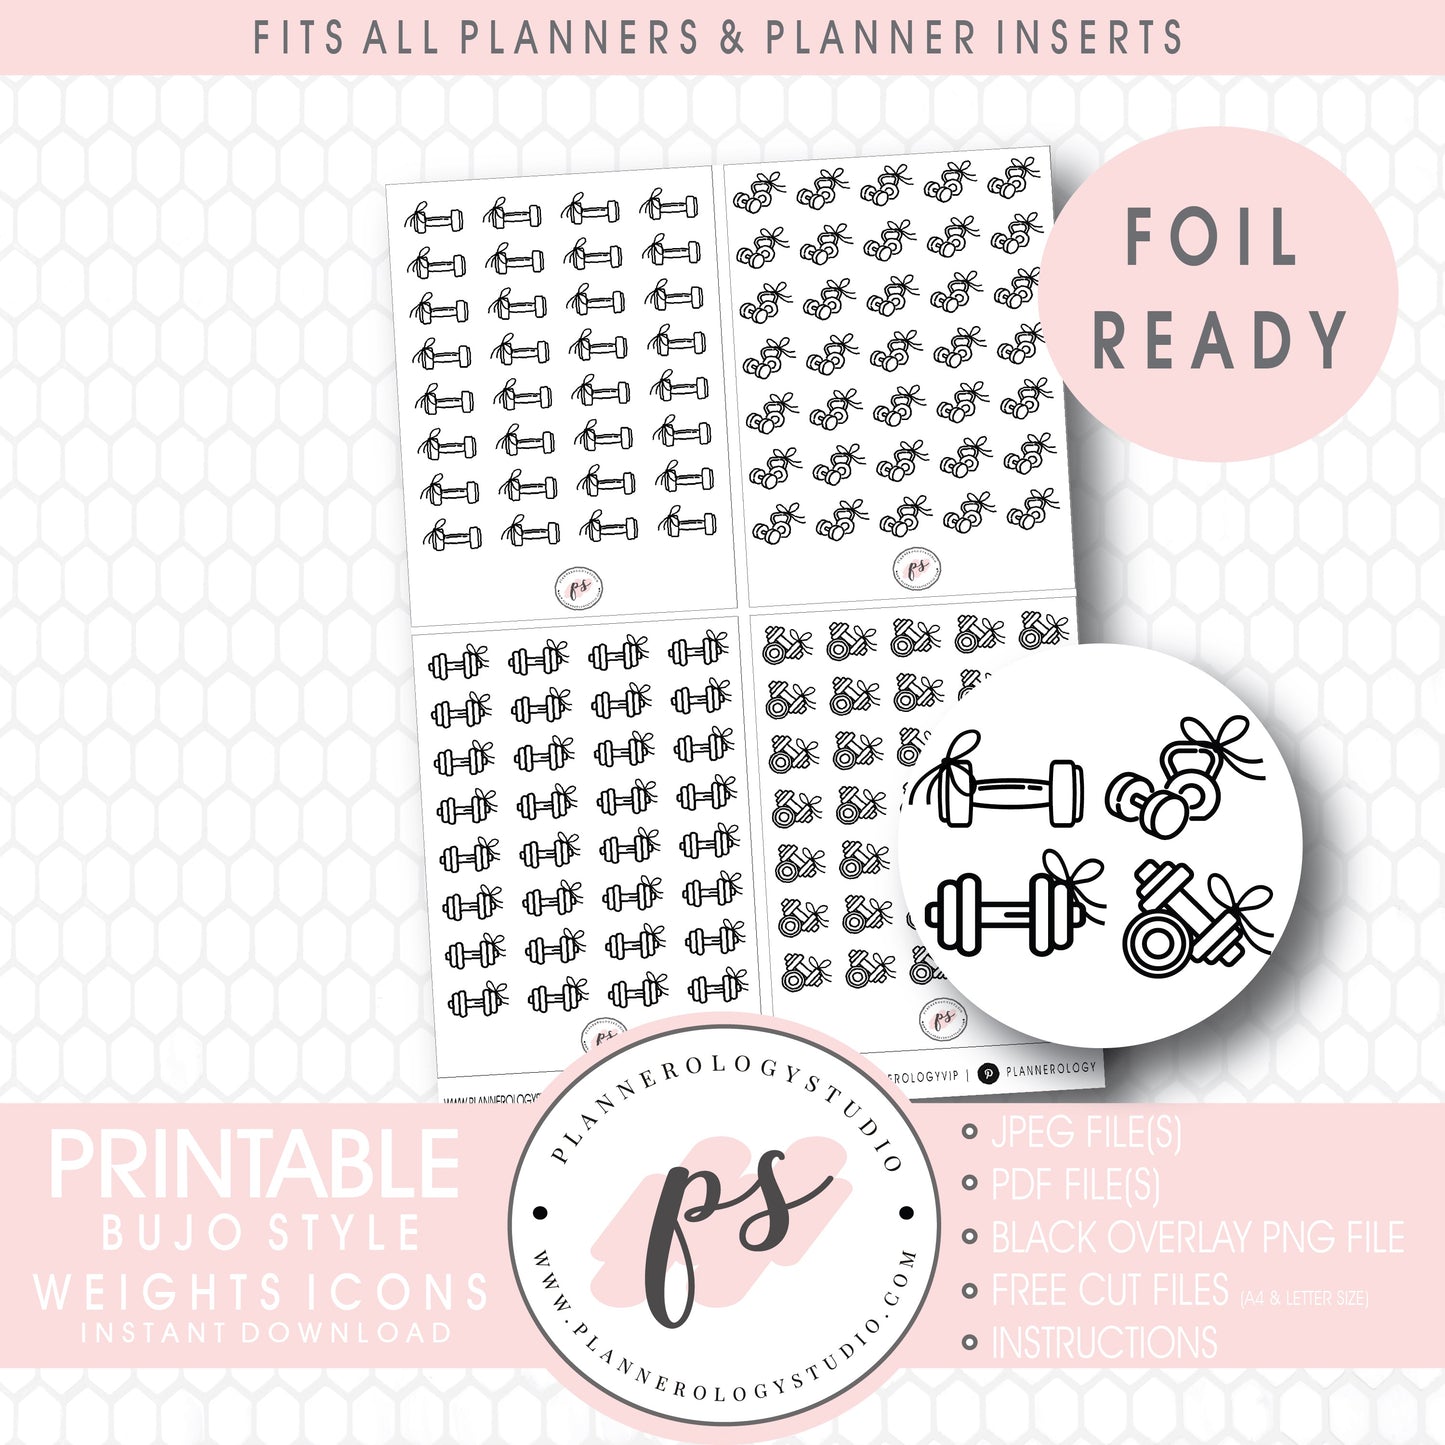 Gym Weights with Bows Icon Digital Printable Planner Stickers (Foil Ready)